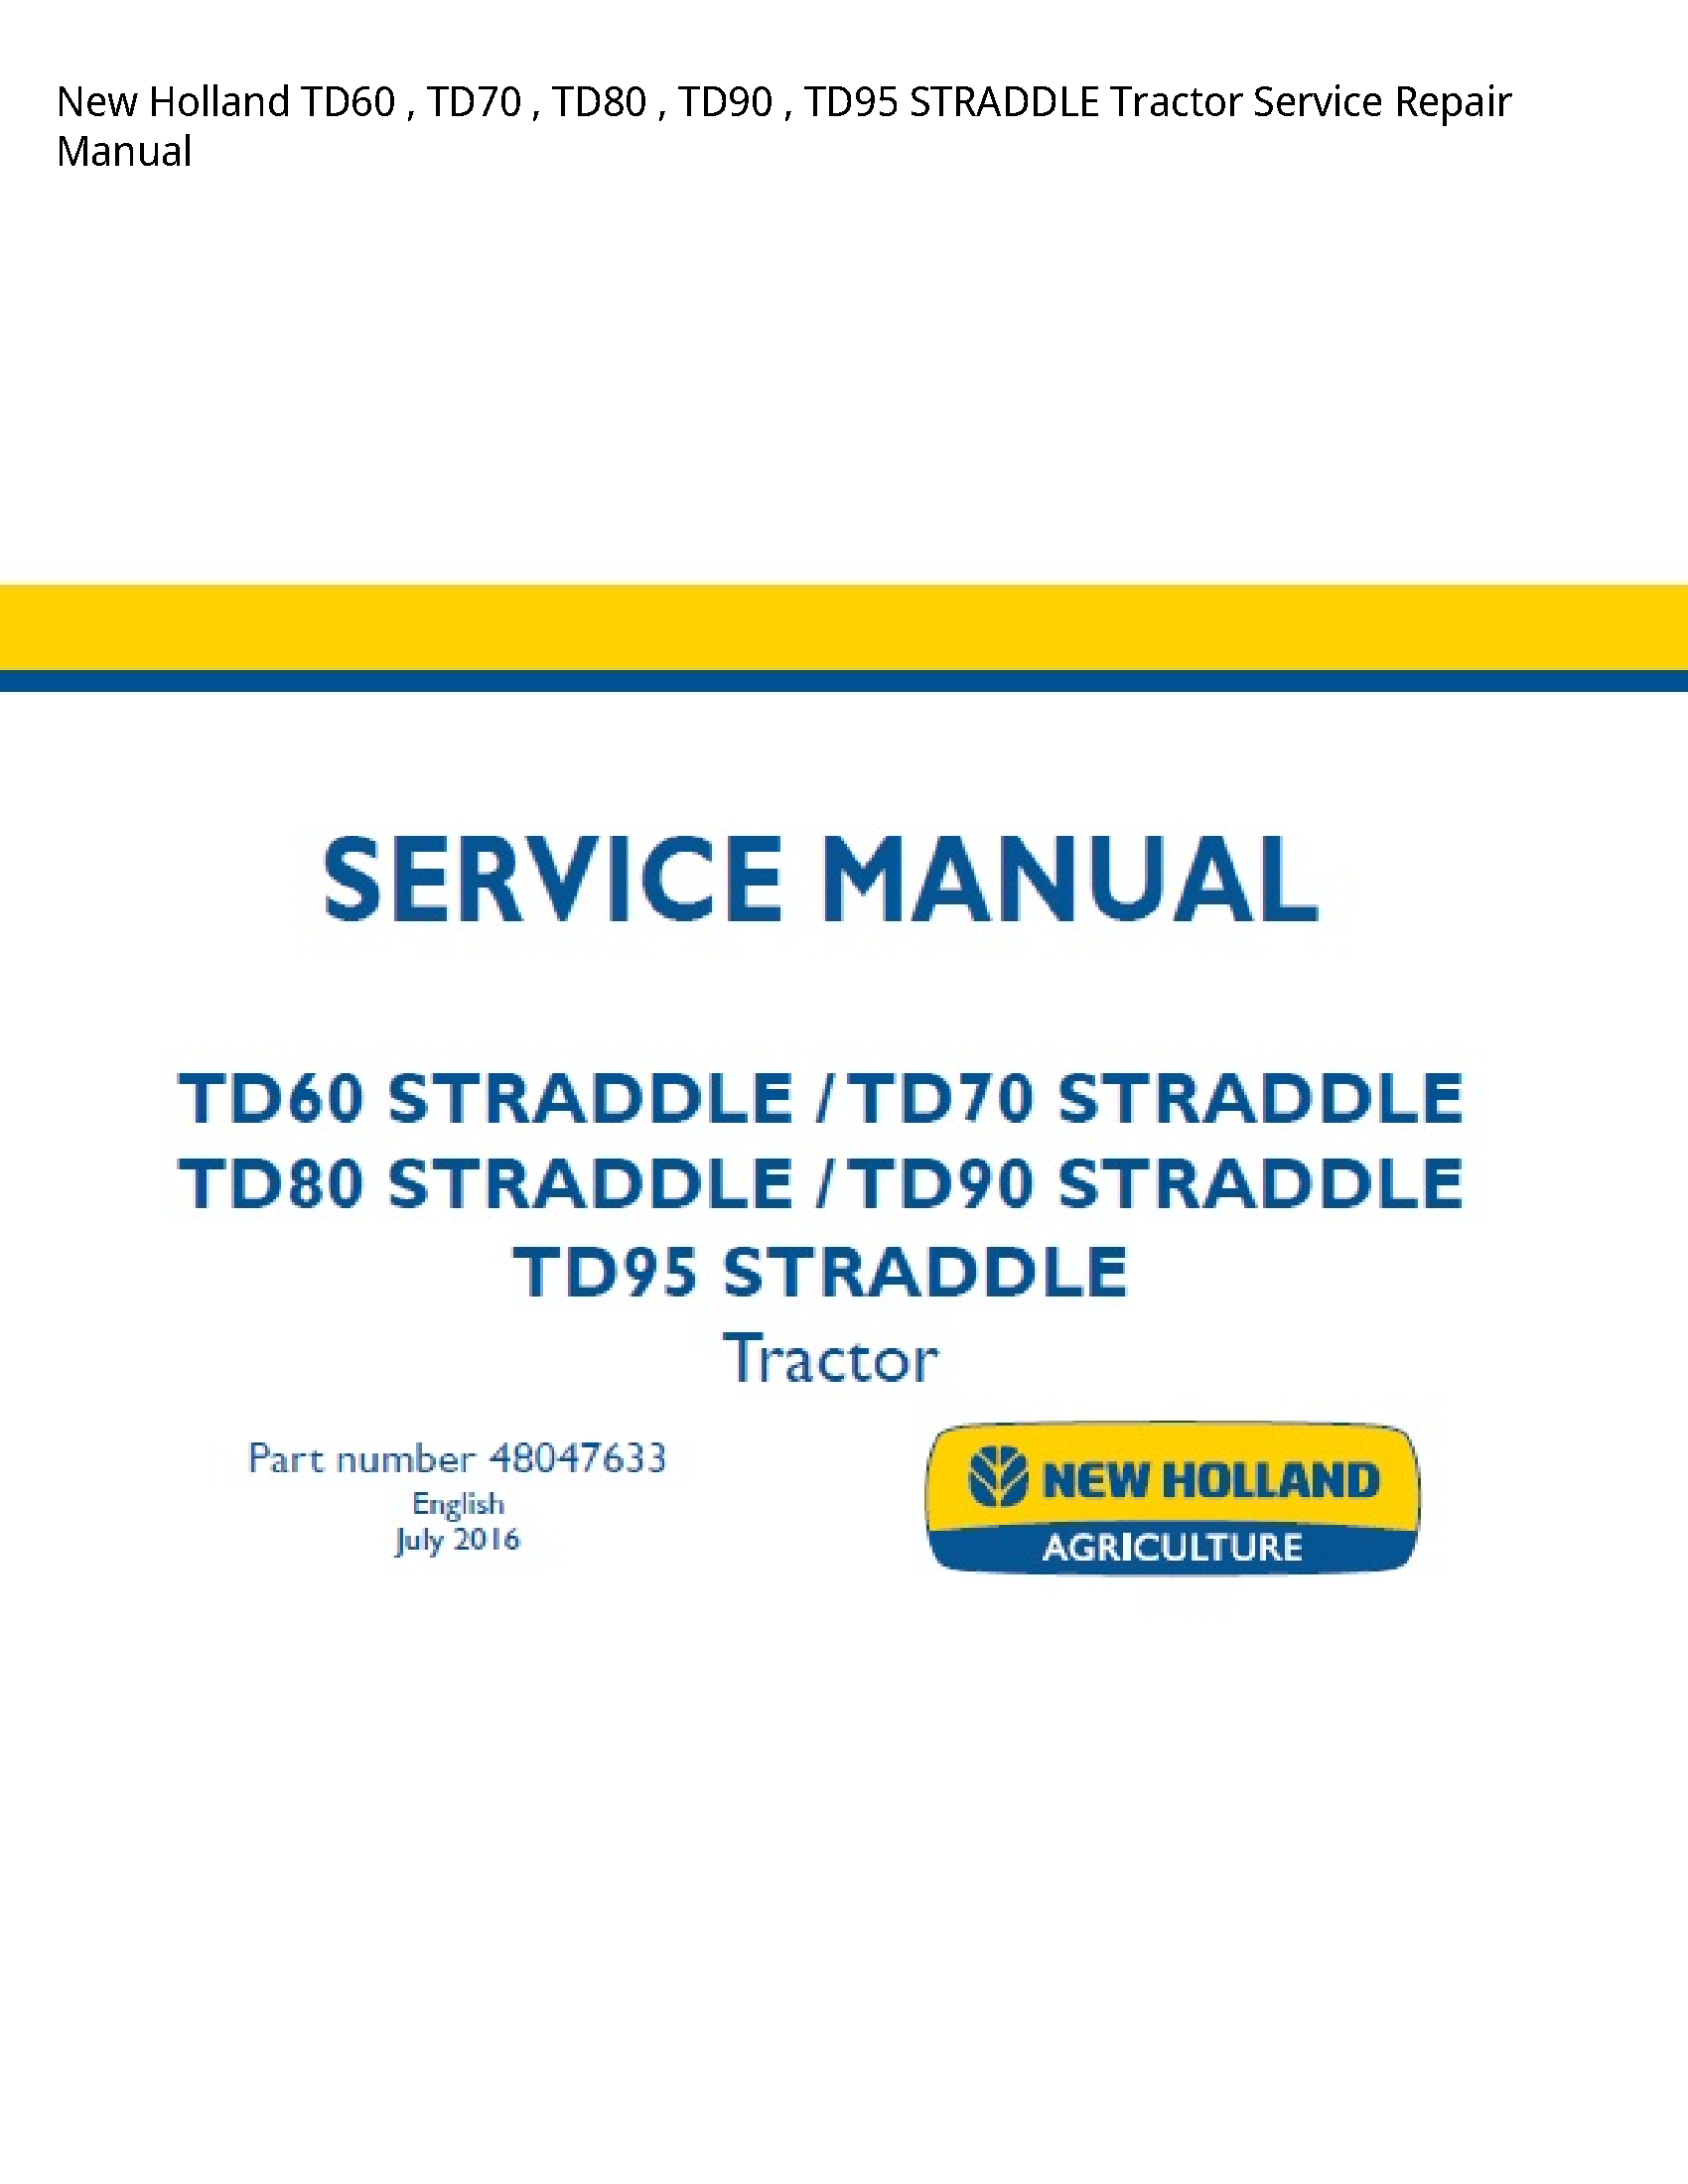 New Holland TD60 STRADDLE Tractor manual